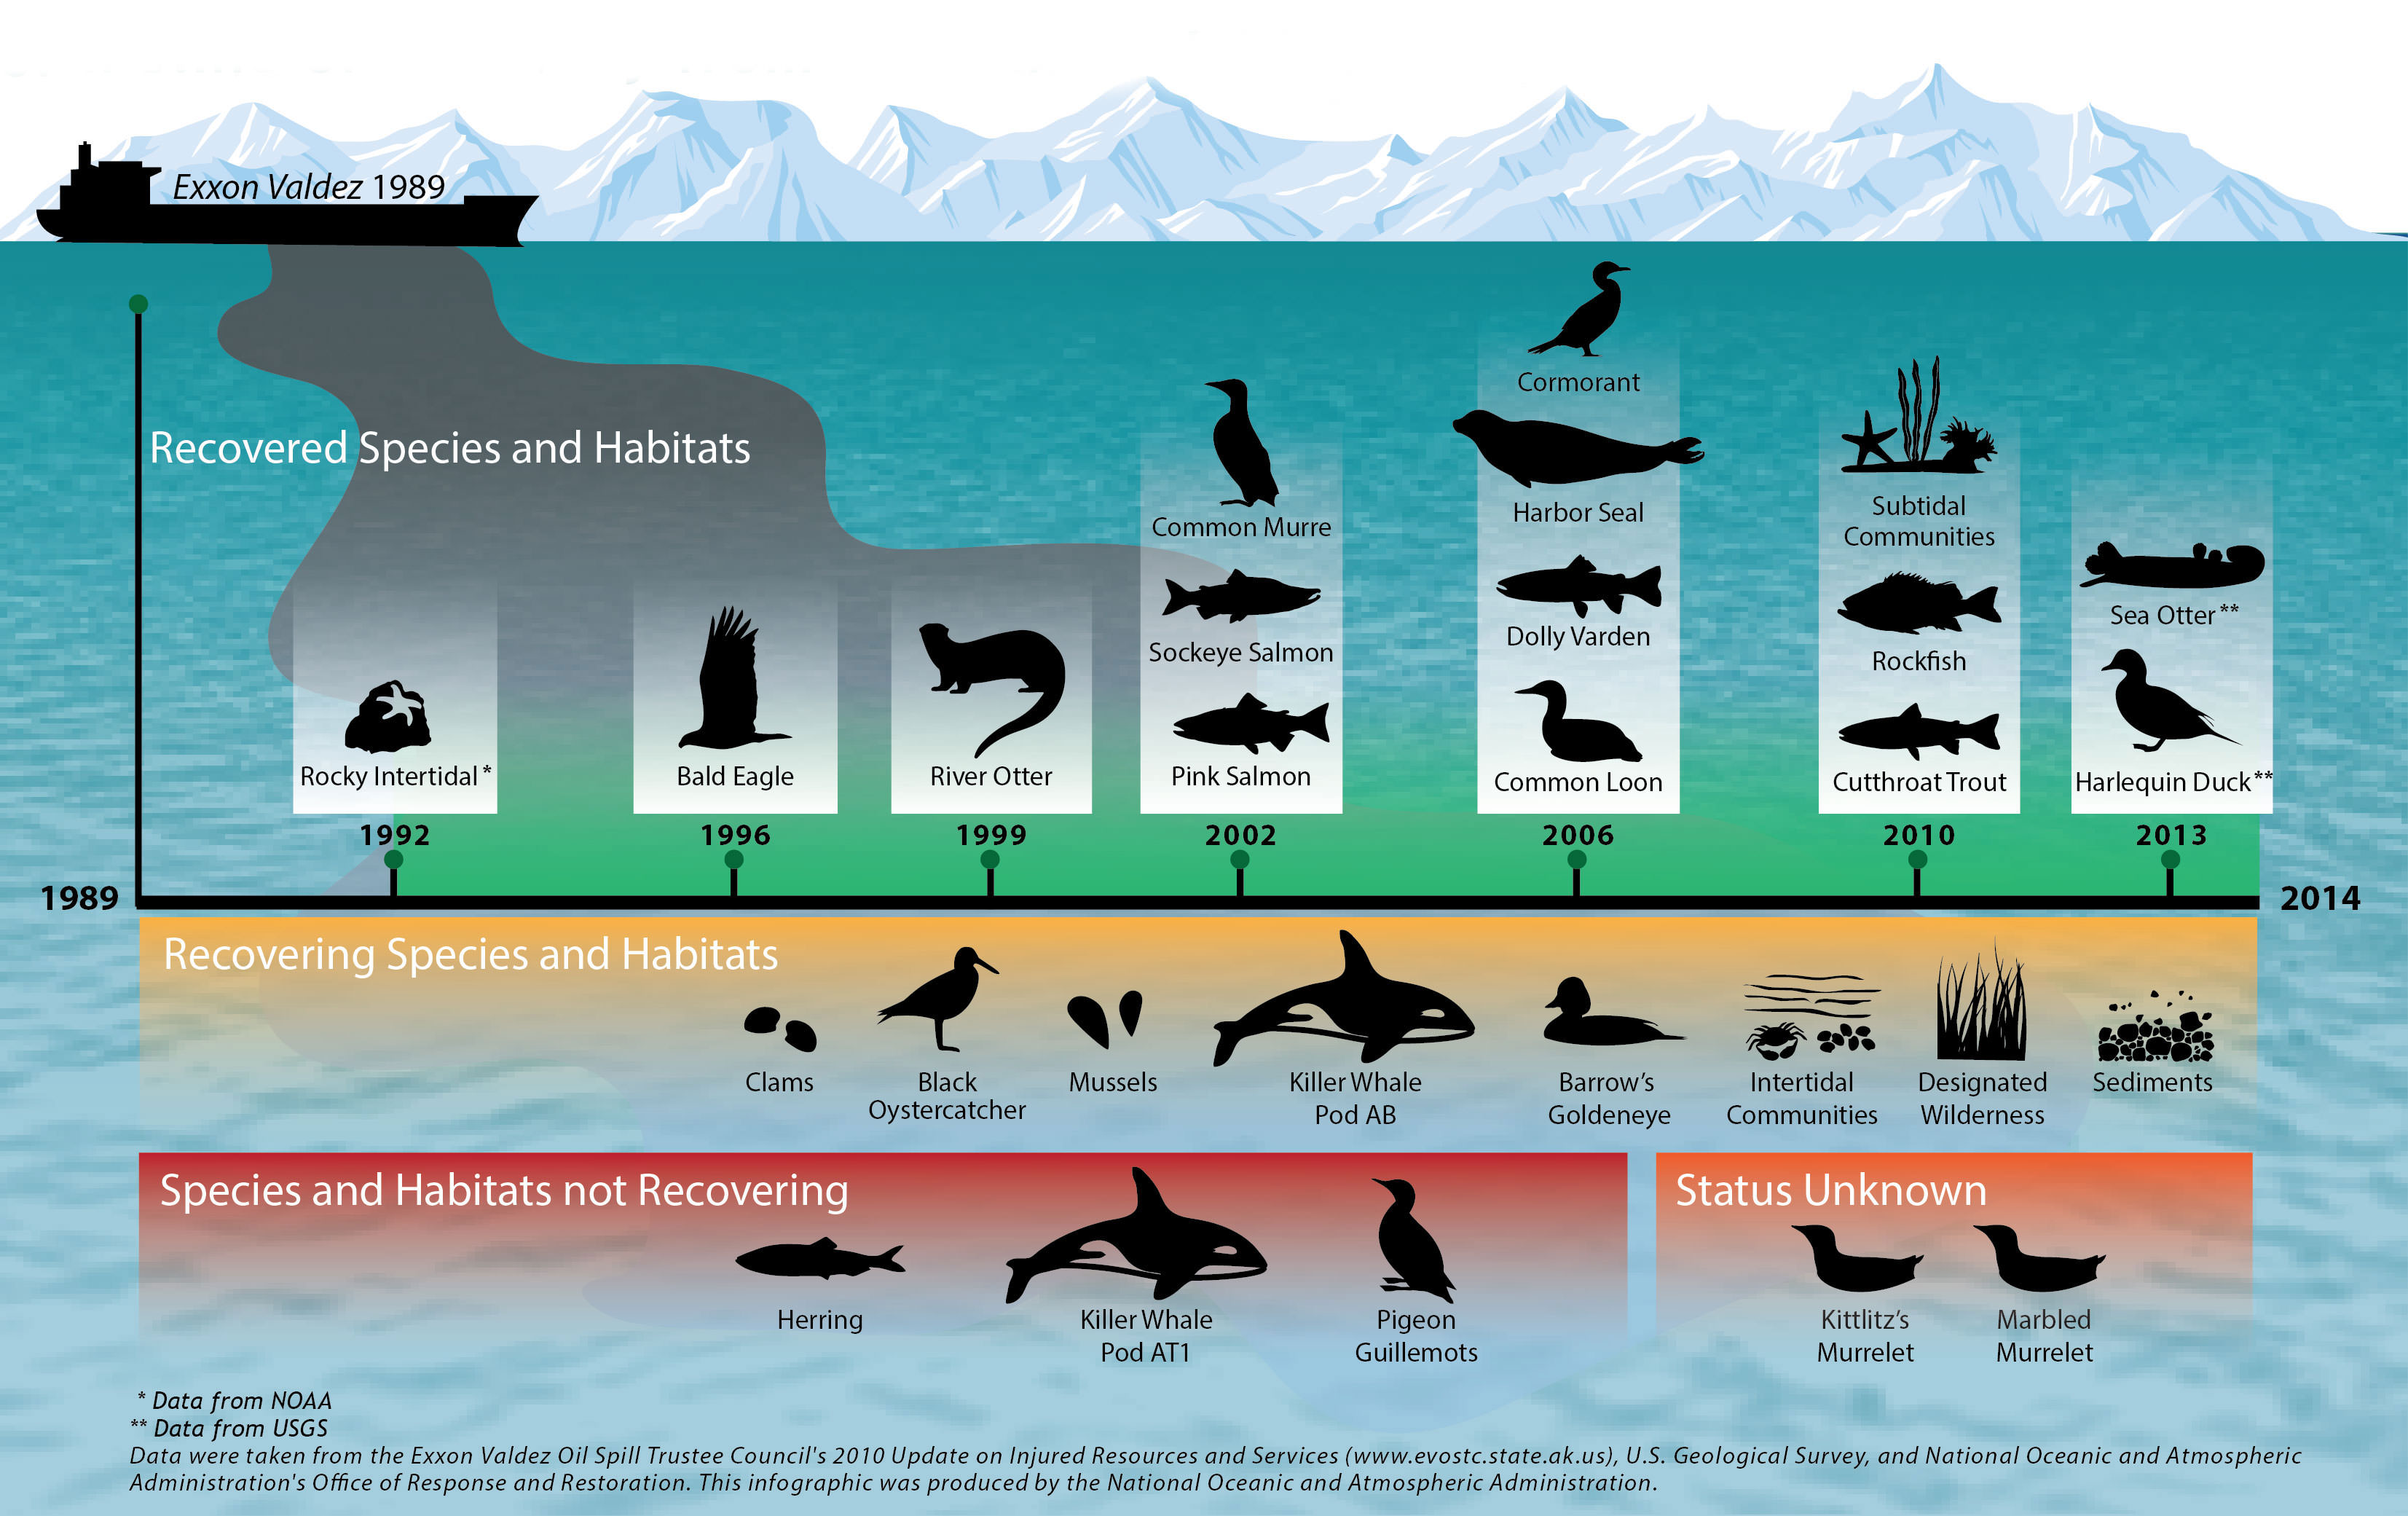 Timeline of environmental recovery from Exxon Valdez oil spill